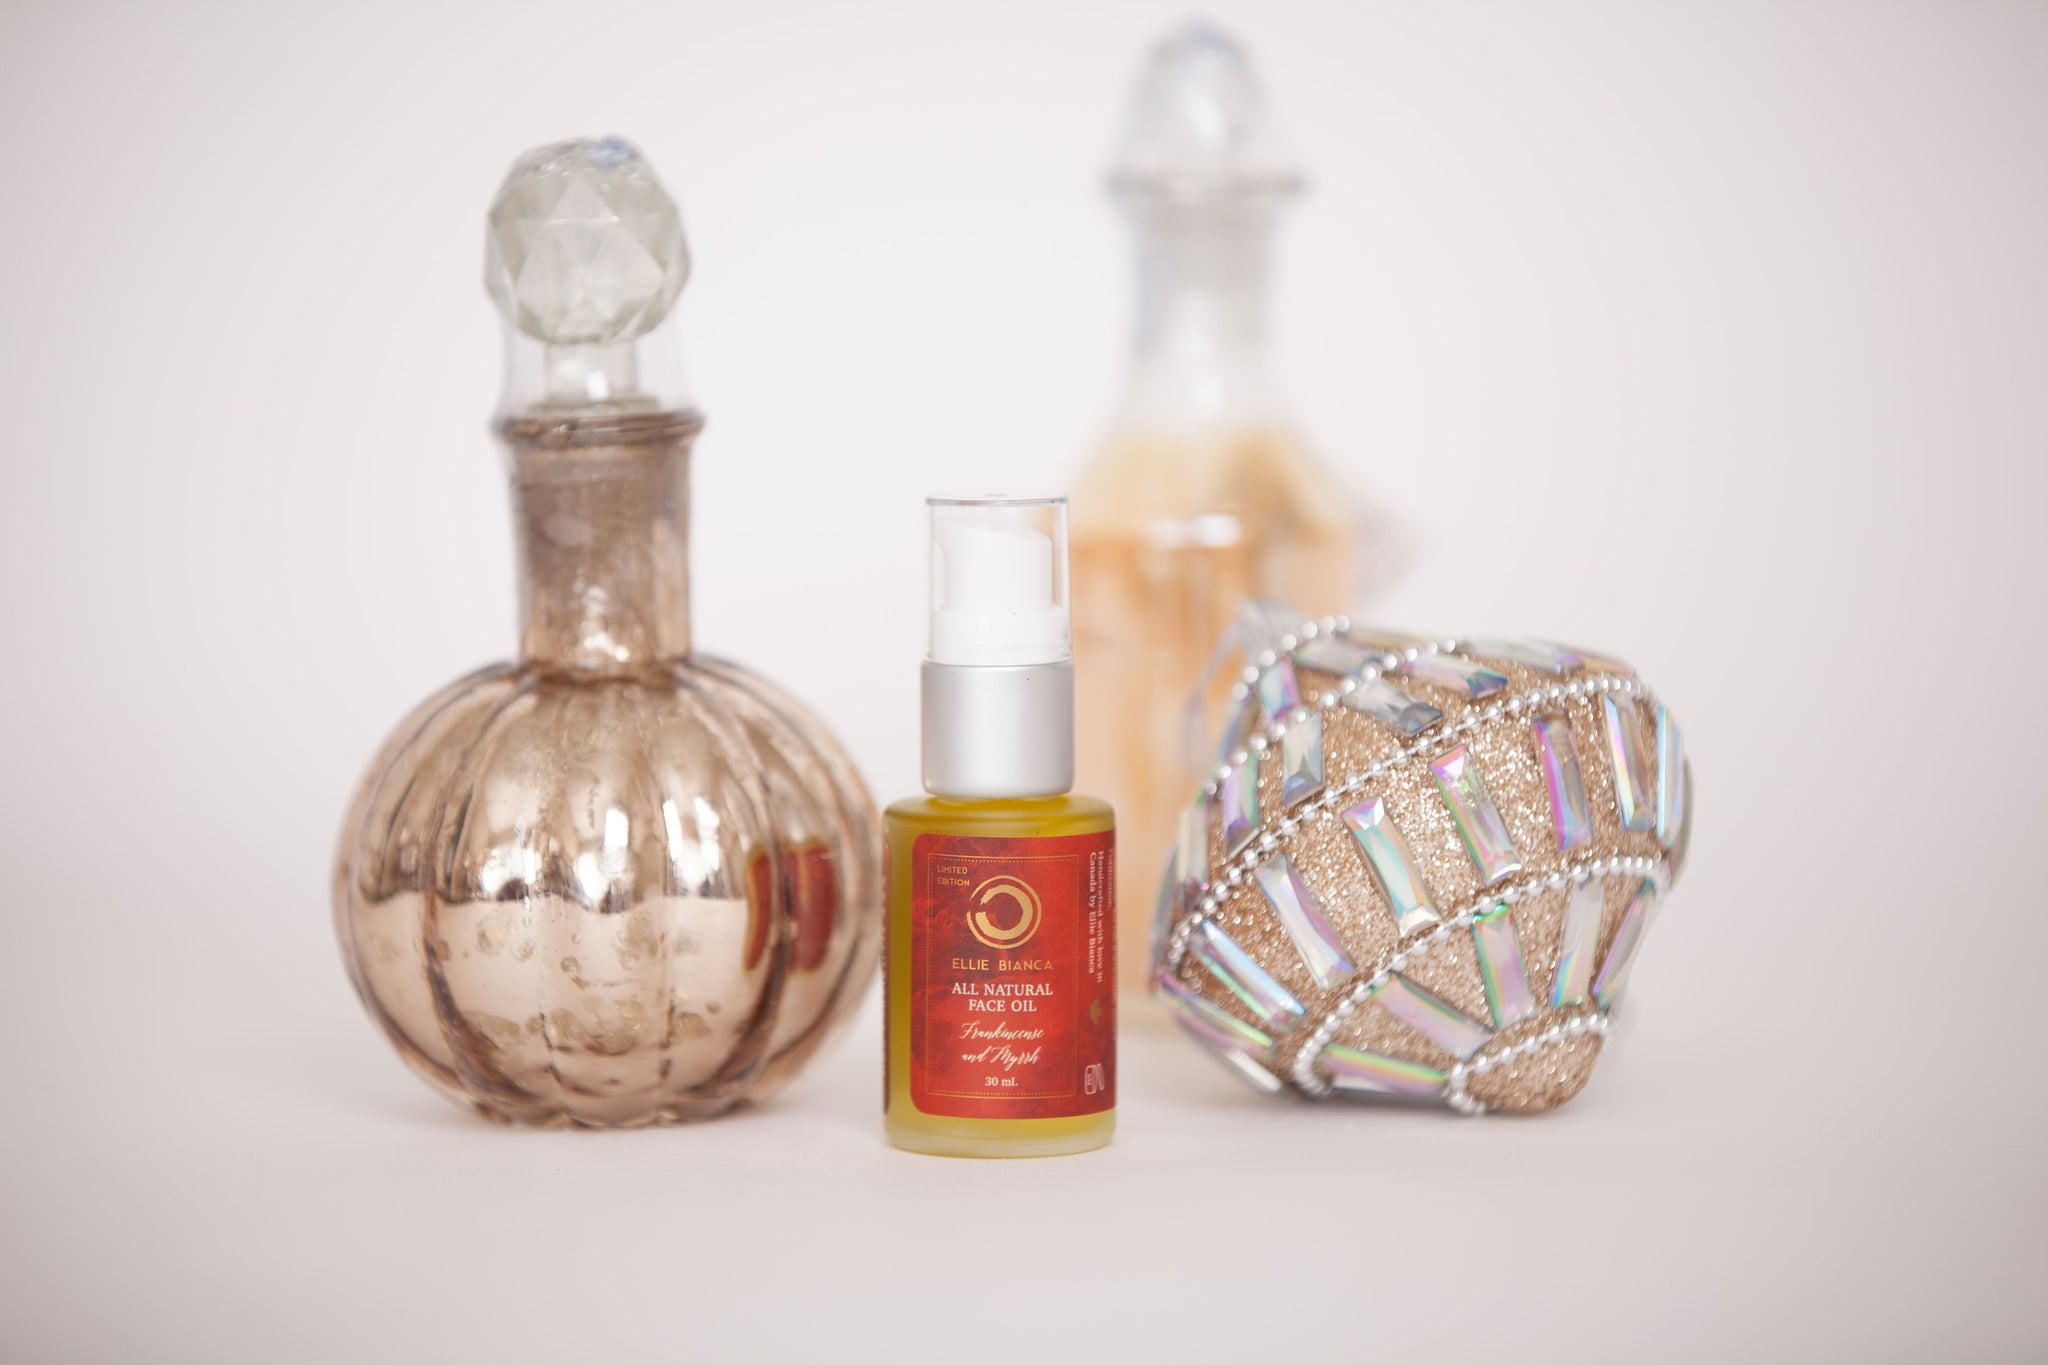 Announcing the New Holiday Frankincense & Myrrh Oil!